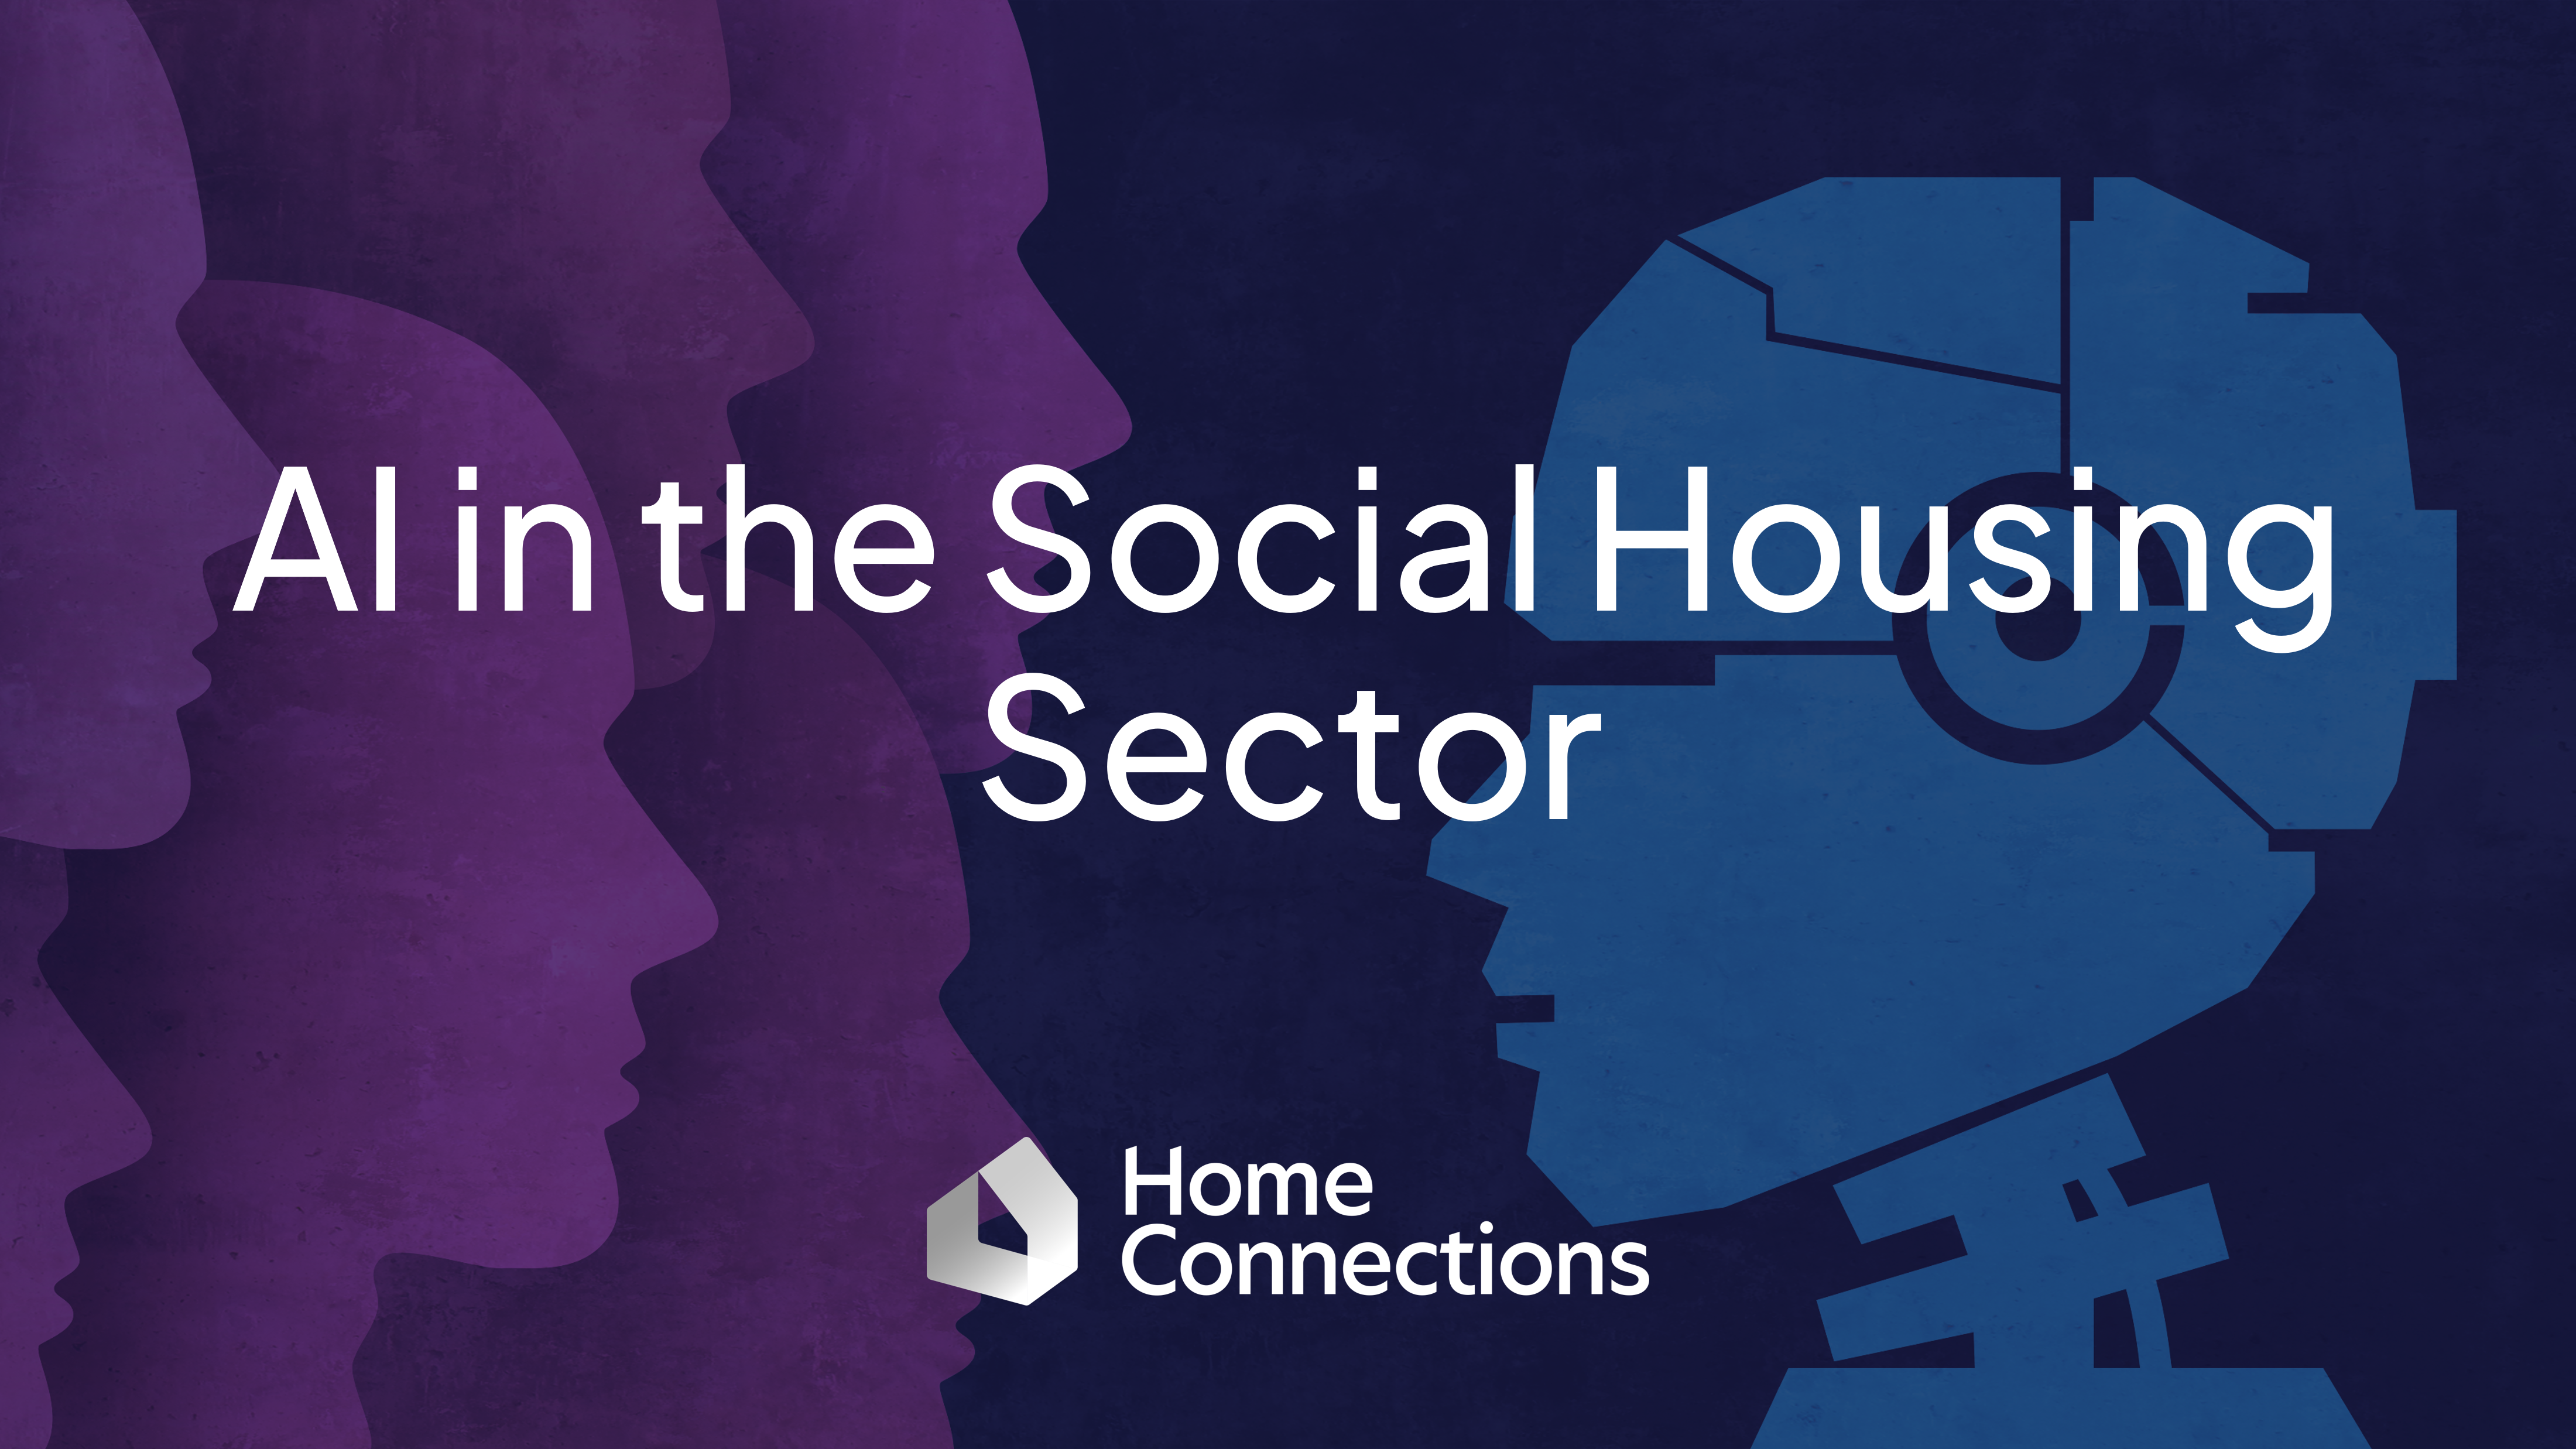 Large white text saying "Ai in the Social Housing Sector"